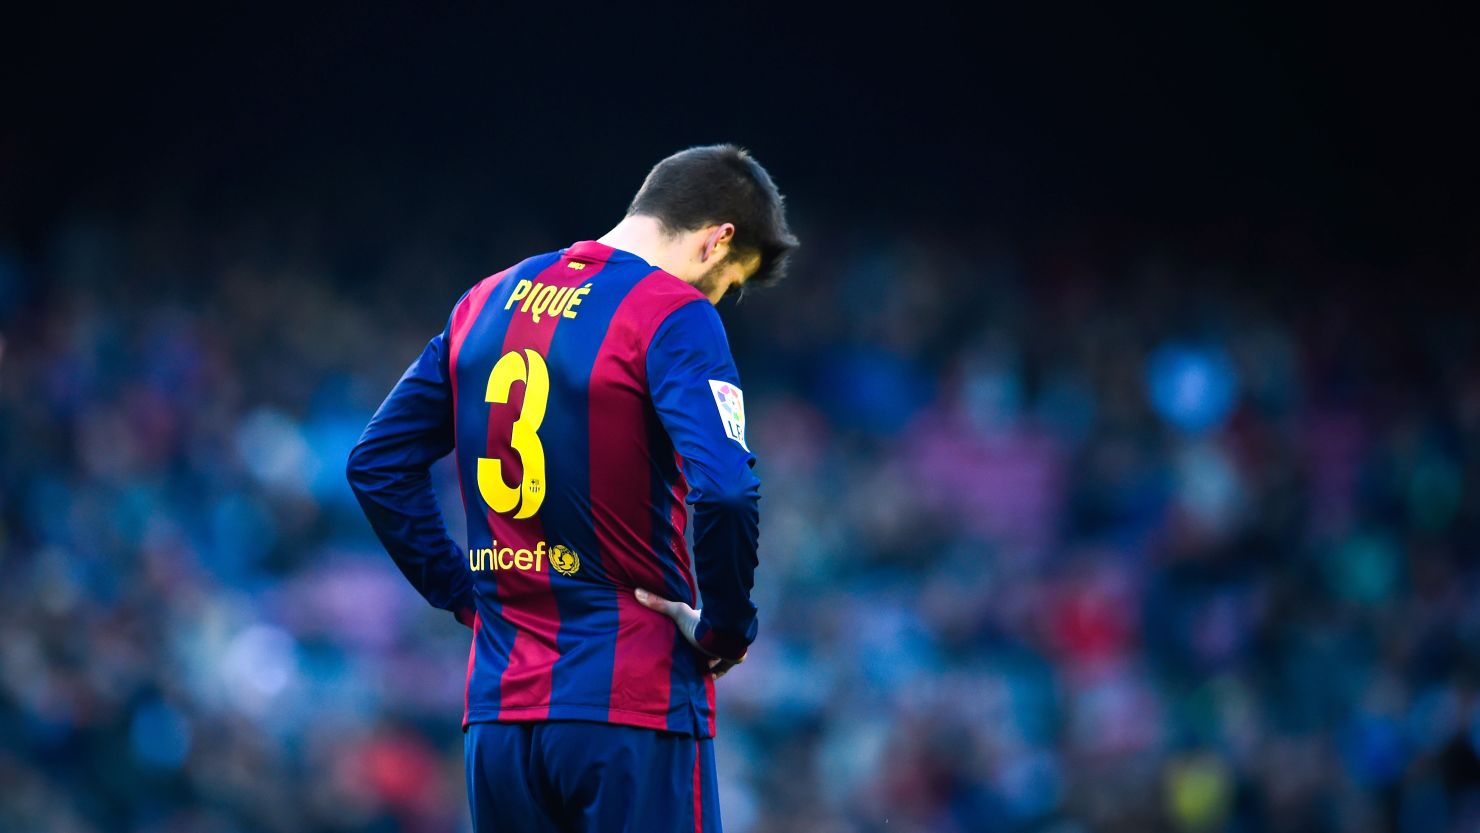 Barcelona's title chances took a huge blow after a 1-0 defeat at home to Malaga.